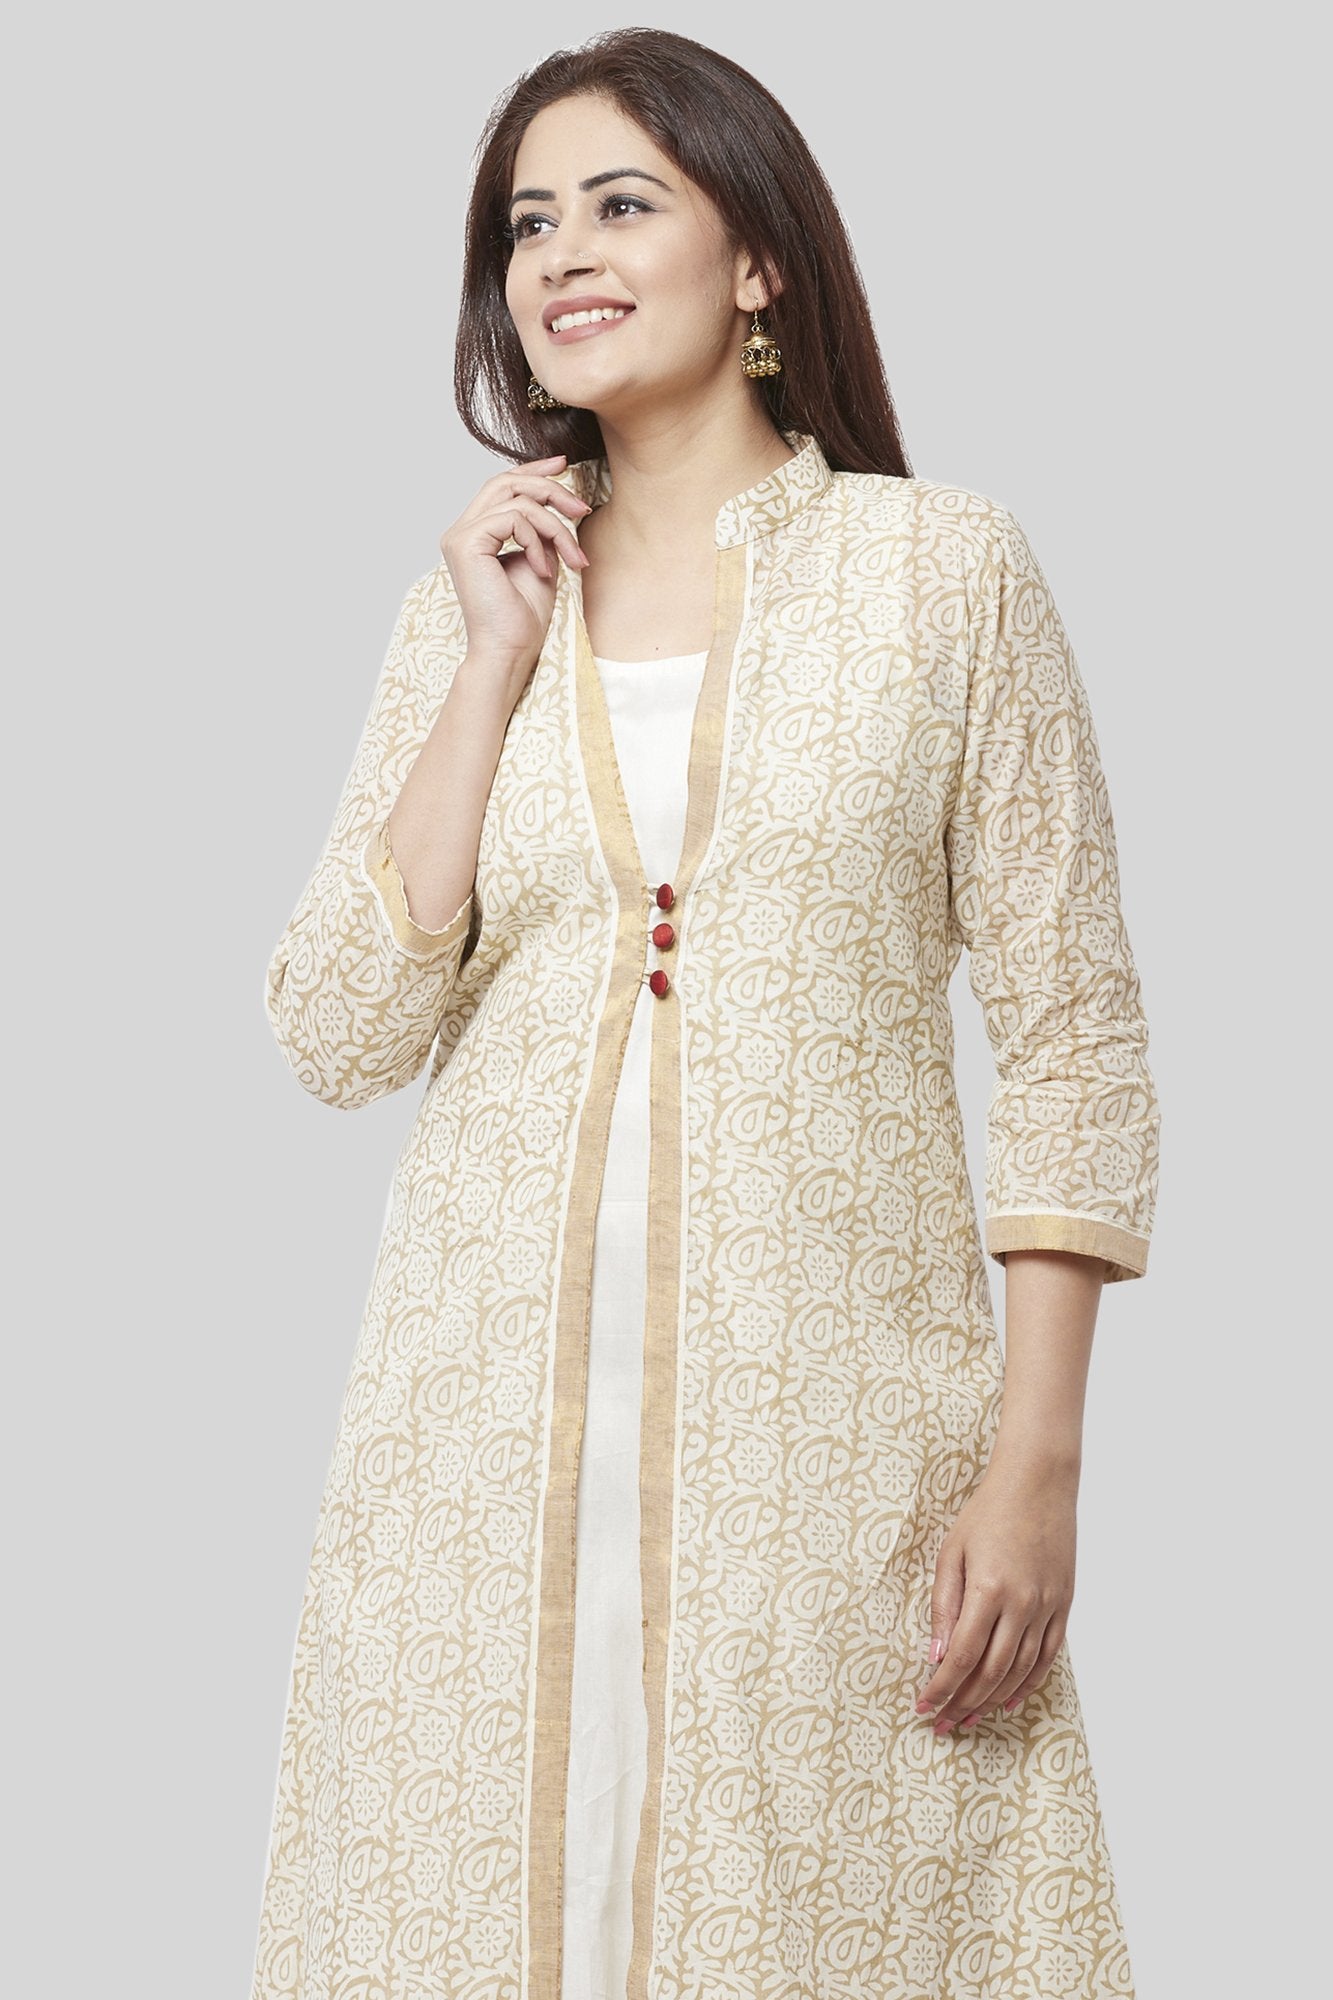 Morpich Floral Embroidered Rayon Kurti Jacket Co Ord Set